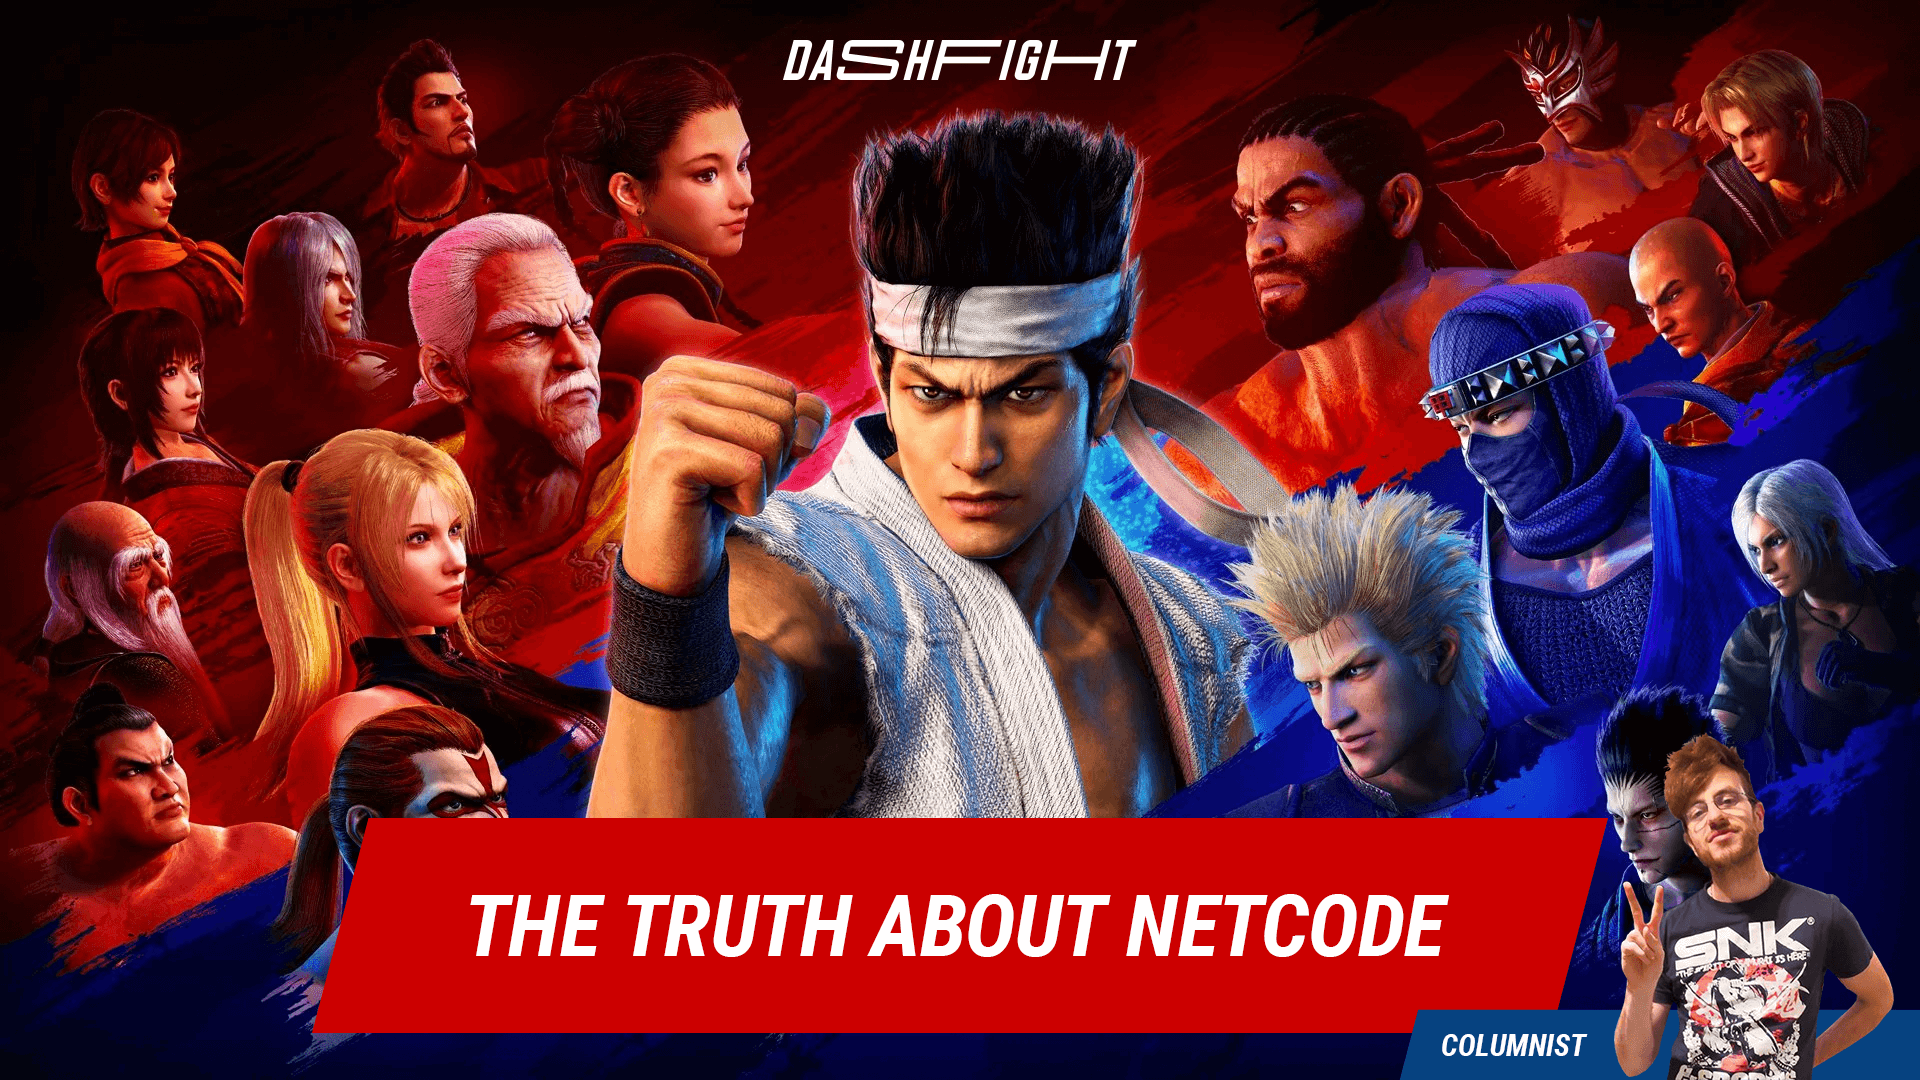 Virtua Fighter 5 Ultimate Showdown: The Truth About Netcode 